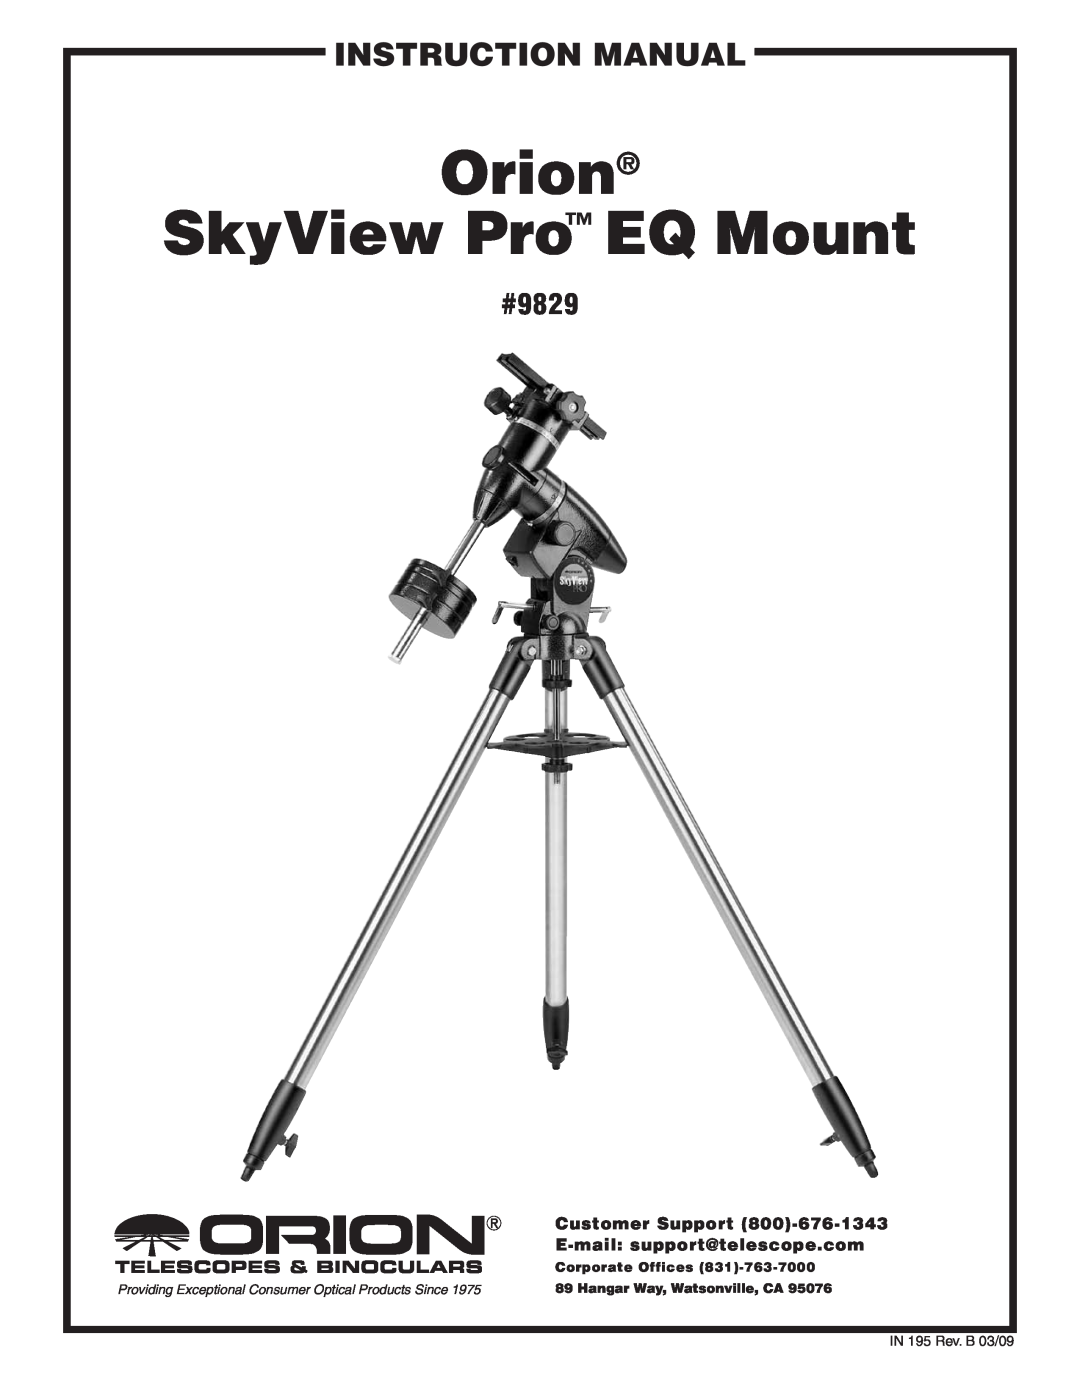 Orion instruction manual #9829, Orion SkyView Pro EQ Mount, Customer Support, E-mail support@telescope.com 